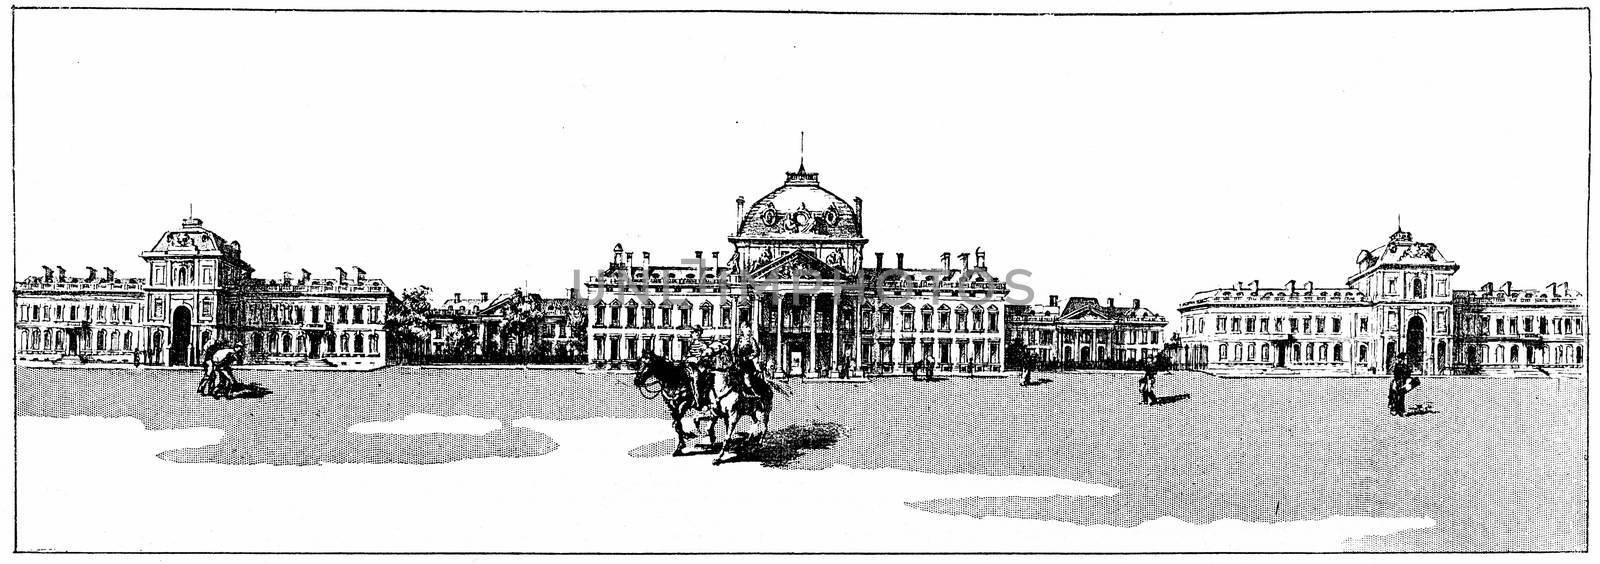 The palace of the Military Academy, vintage engraving. by Morphart